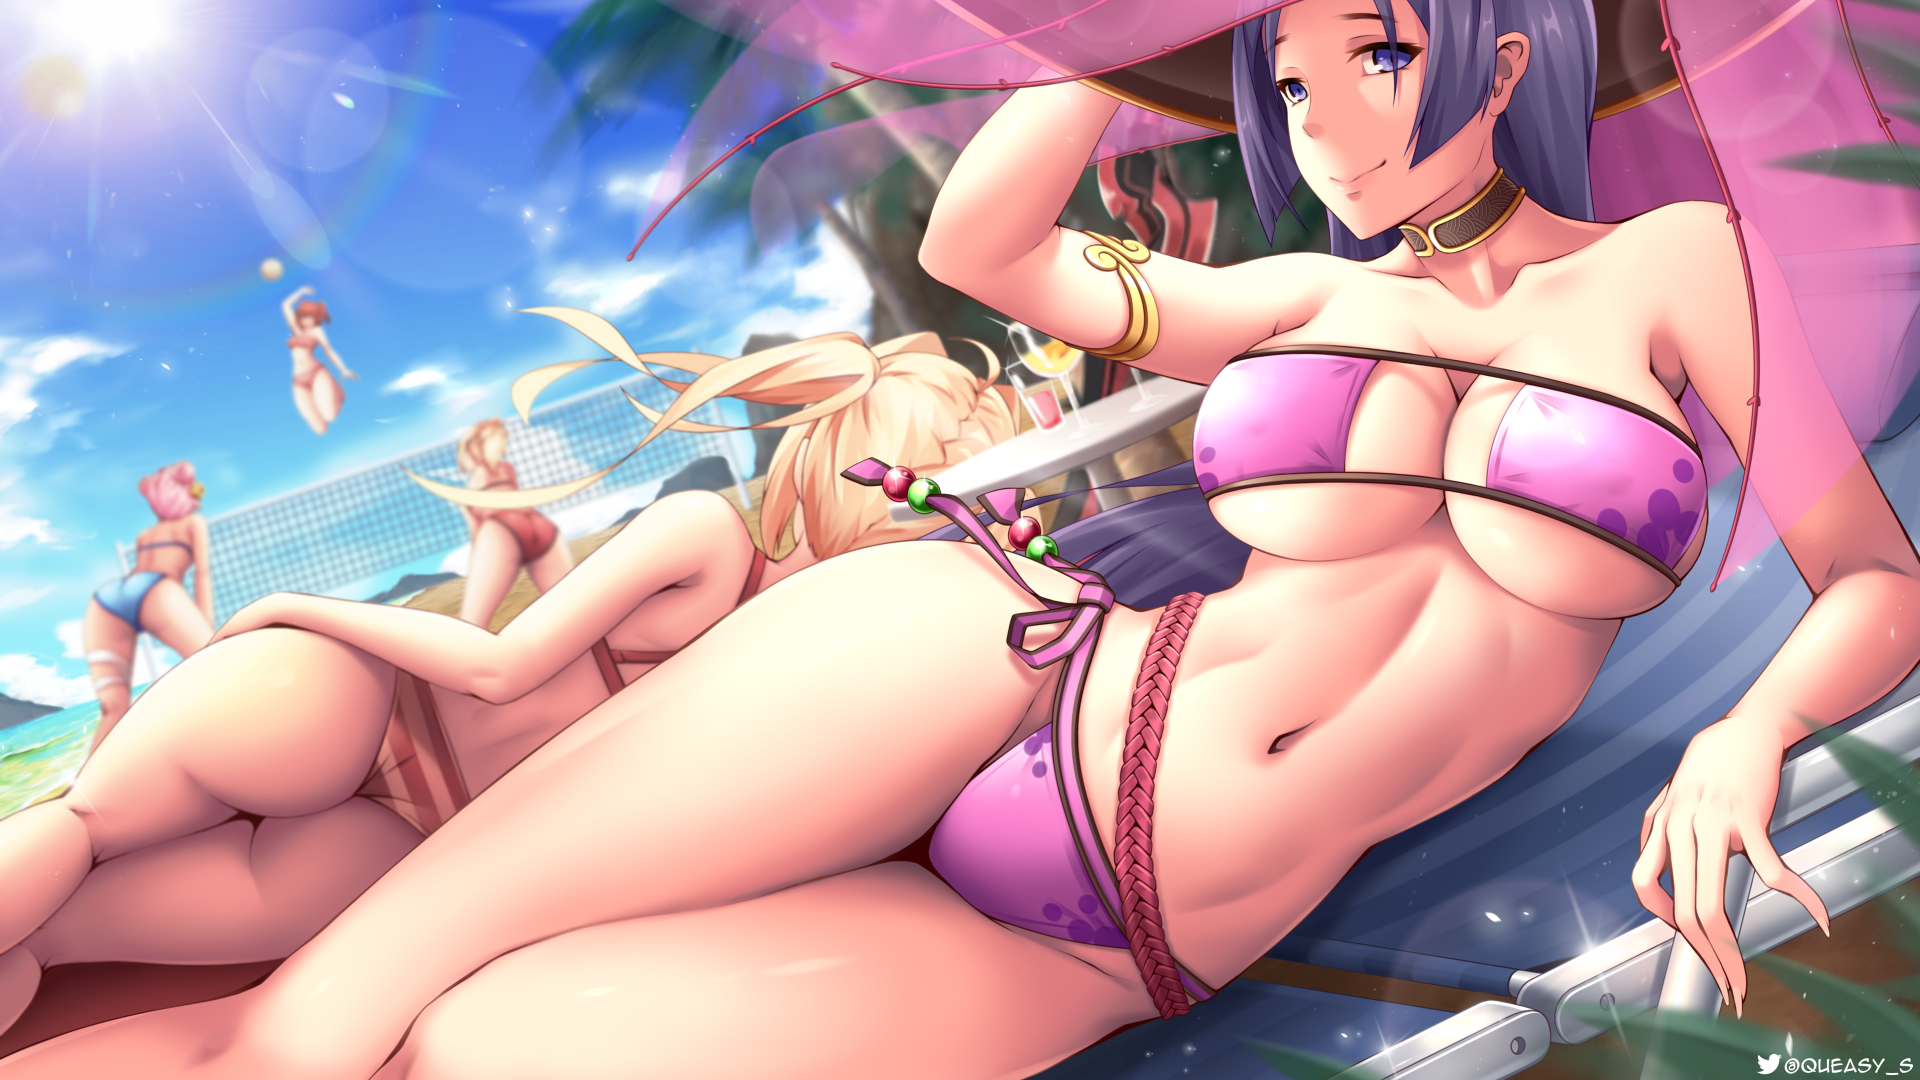 Anime 1920x1080 QueasyS group of women anime girls lying down Fate series outdoors Frankenstein (Fate/Apocrypha) Fujimaru Ritsuka beach Minamoto no Raikou ass Mordred (Fate/Apocrypha) Nero Claudius bikini looking at viewer Sun women on beach clouds beach ball purple bikini swimwear long hair beach volleyball thighs big boobs cleavage sunbed lying on side choker women outdoors smiling bent over blurry background belly depth of field leaves watermarked sunlight